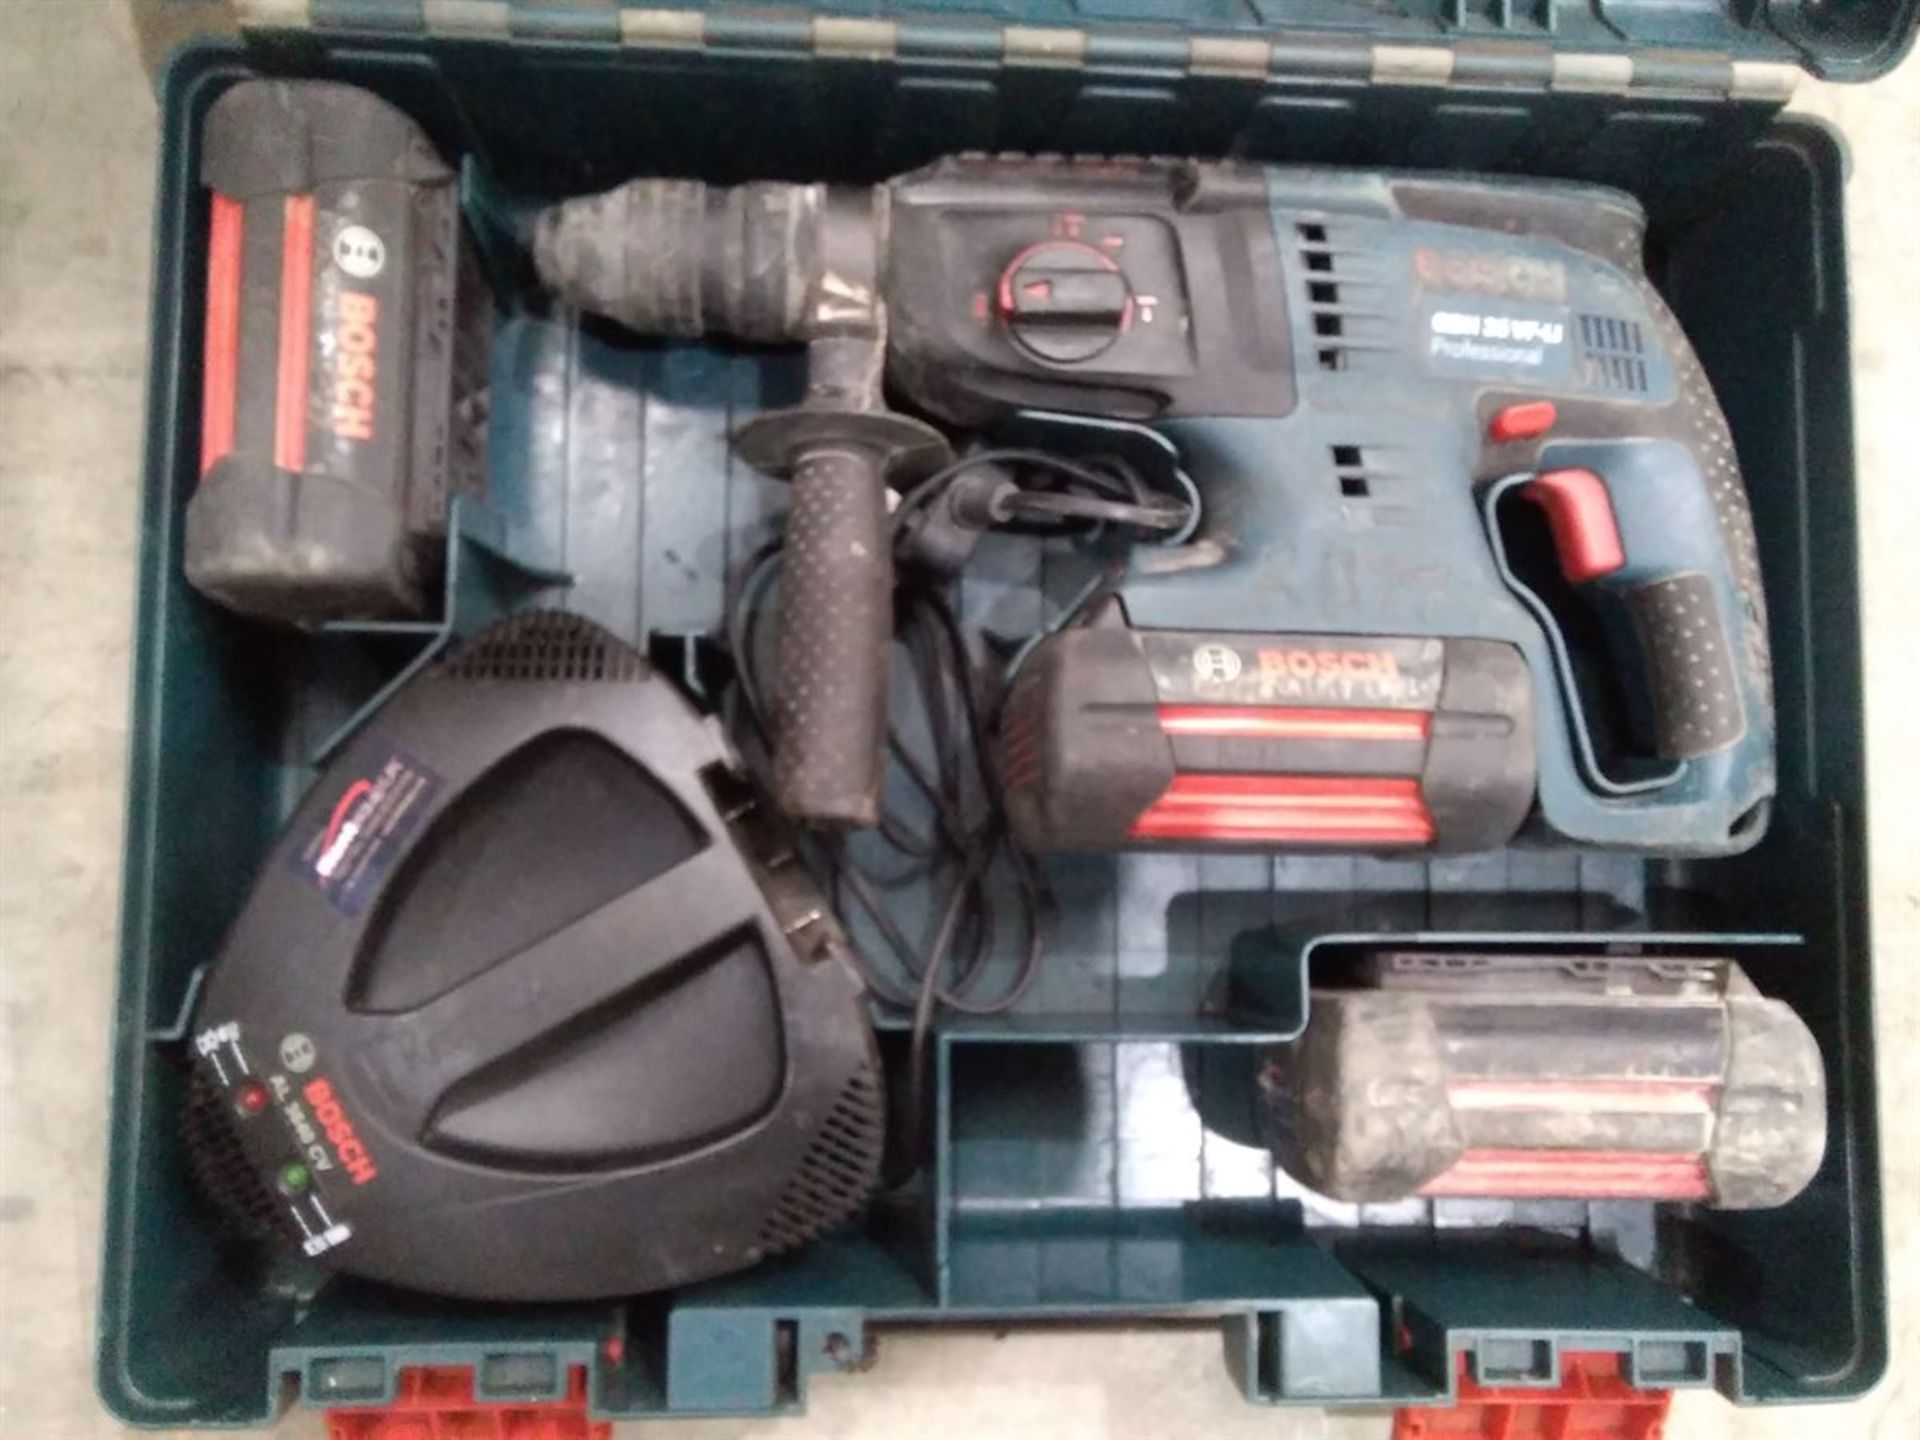 Bosch GBH 36 V-LI Hammer Drill. c/w Battery and Charger